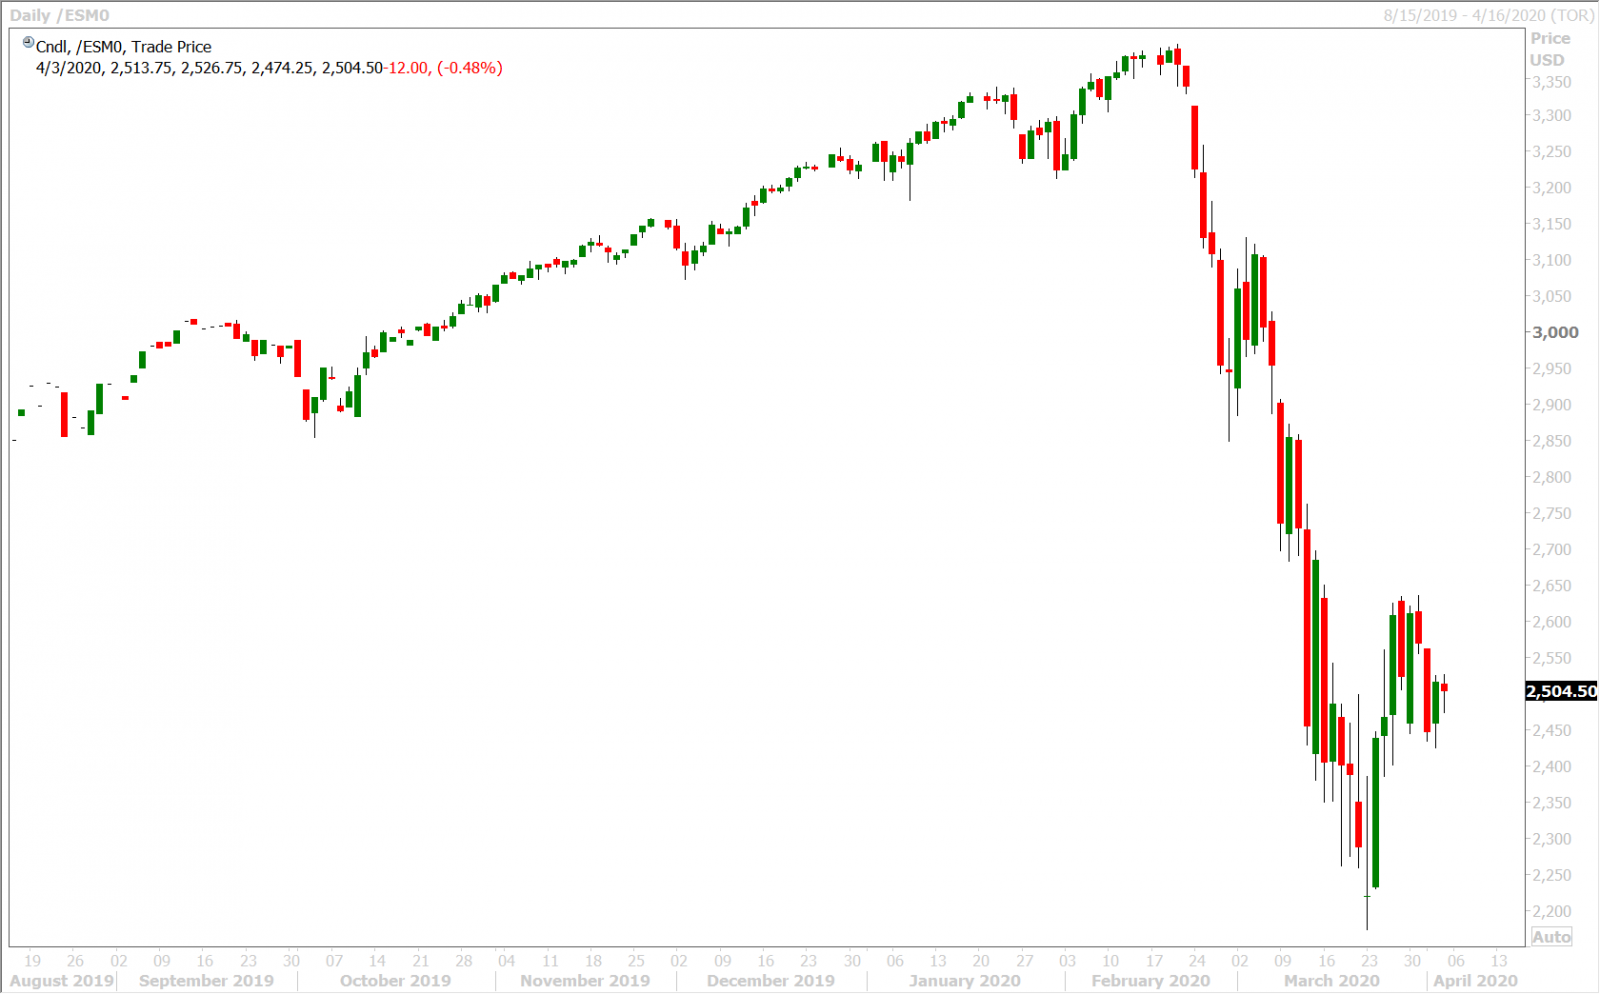 JUNE S&P 500 DAILY